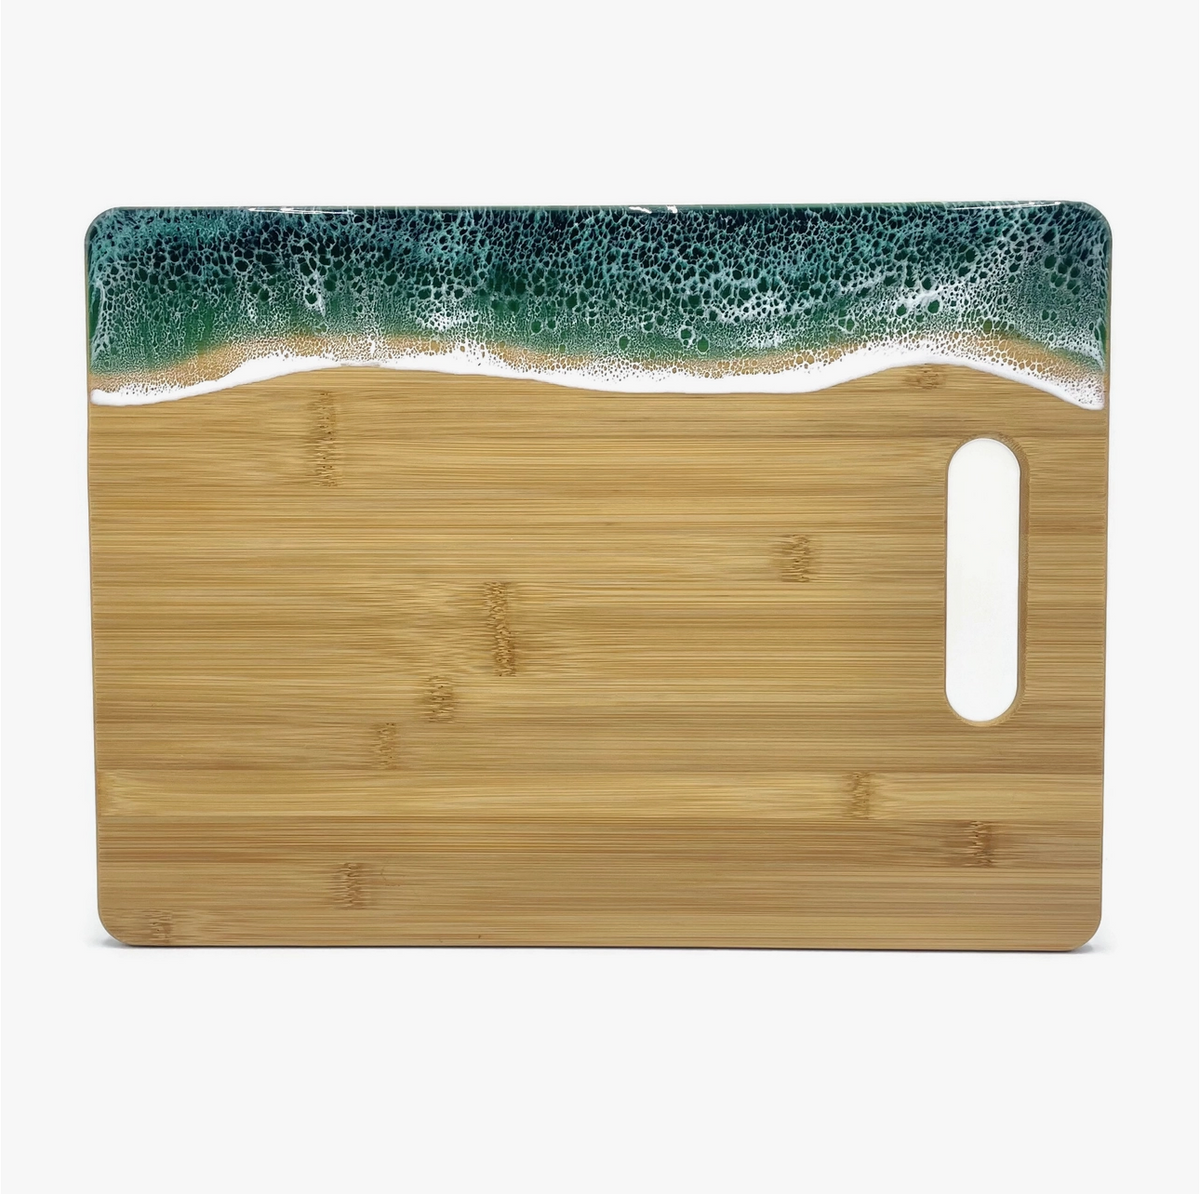 Large Cutting Board in Ocean Blue - Heart of the Home LV